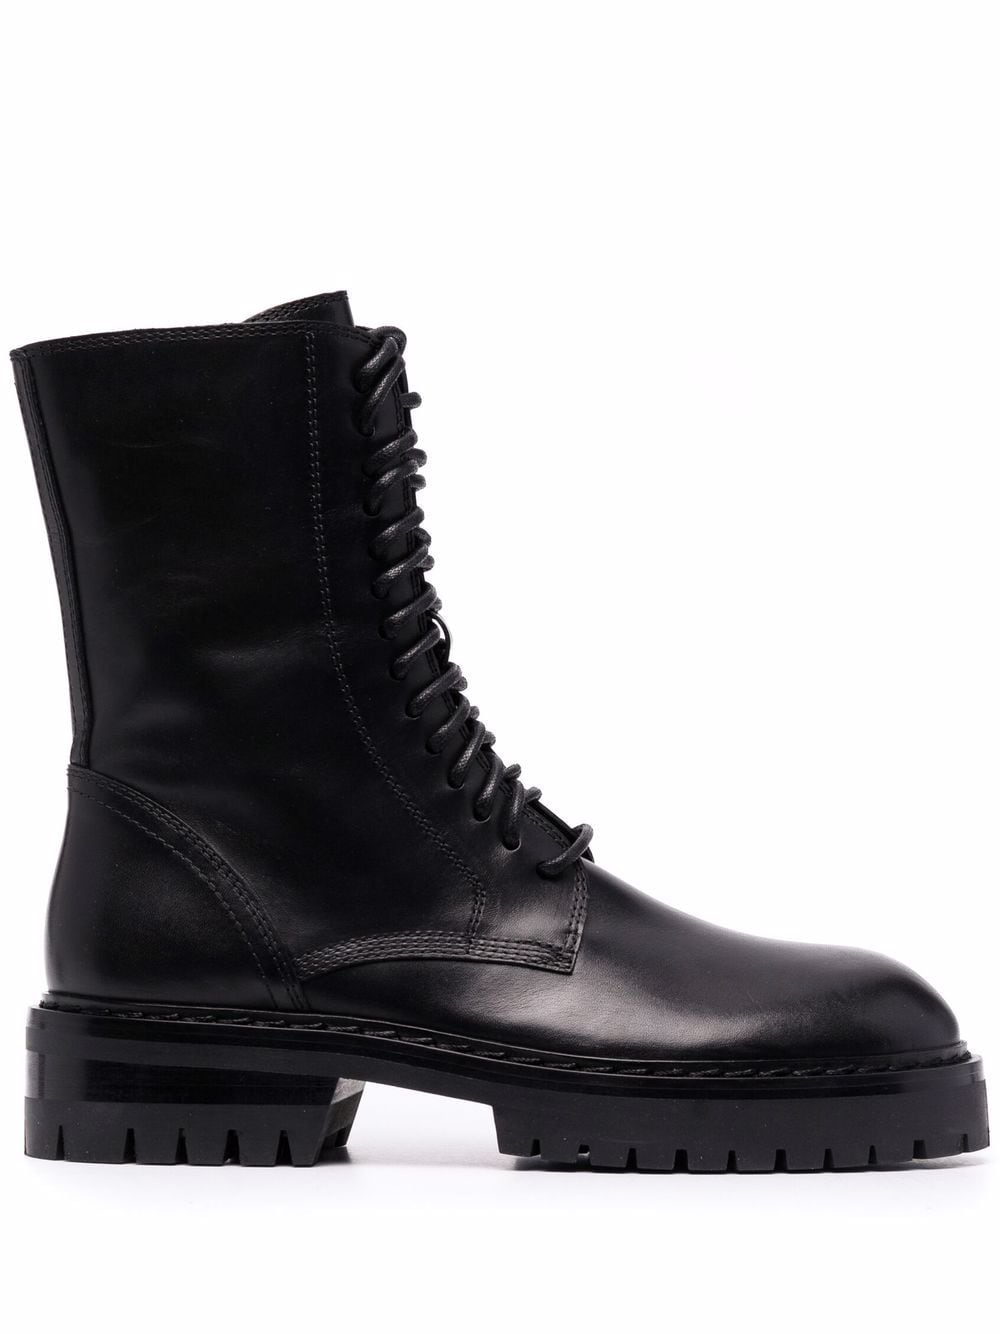 Black leather leather combat boots